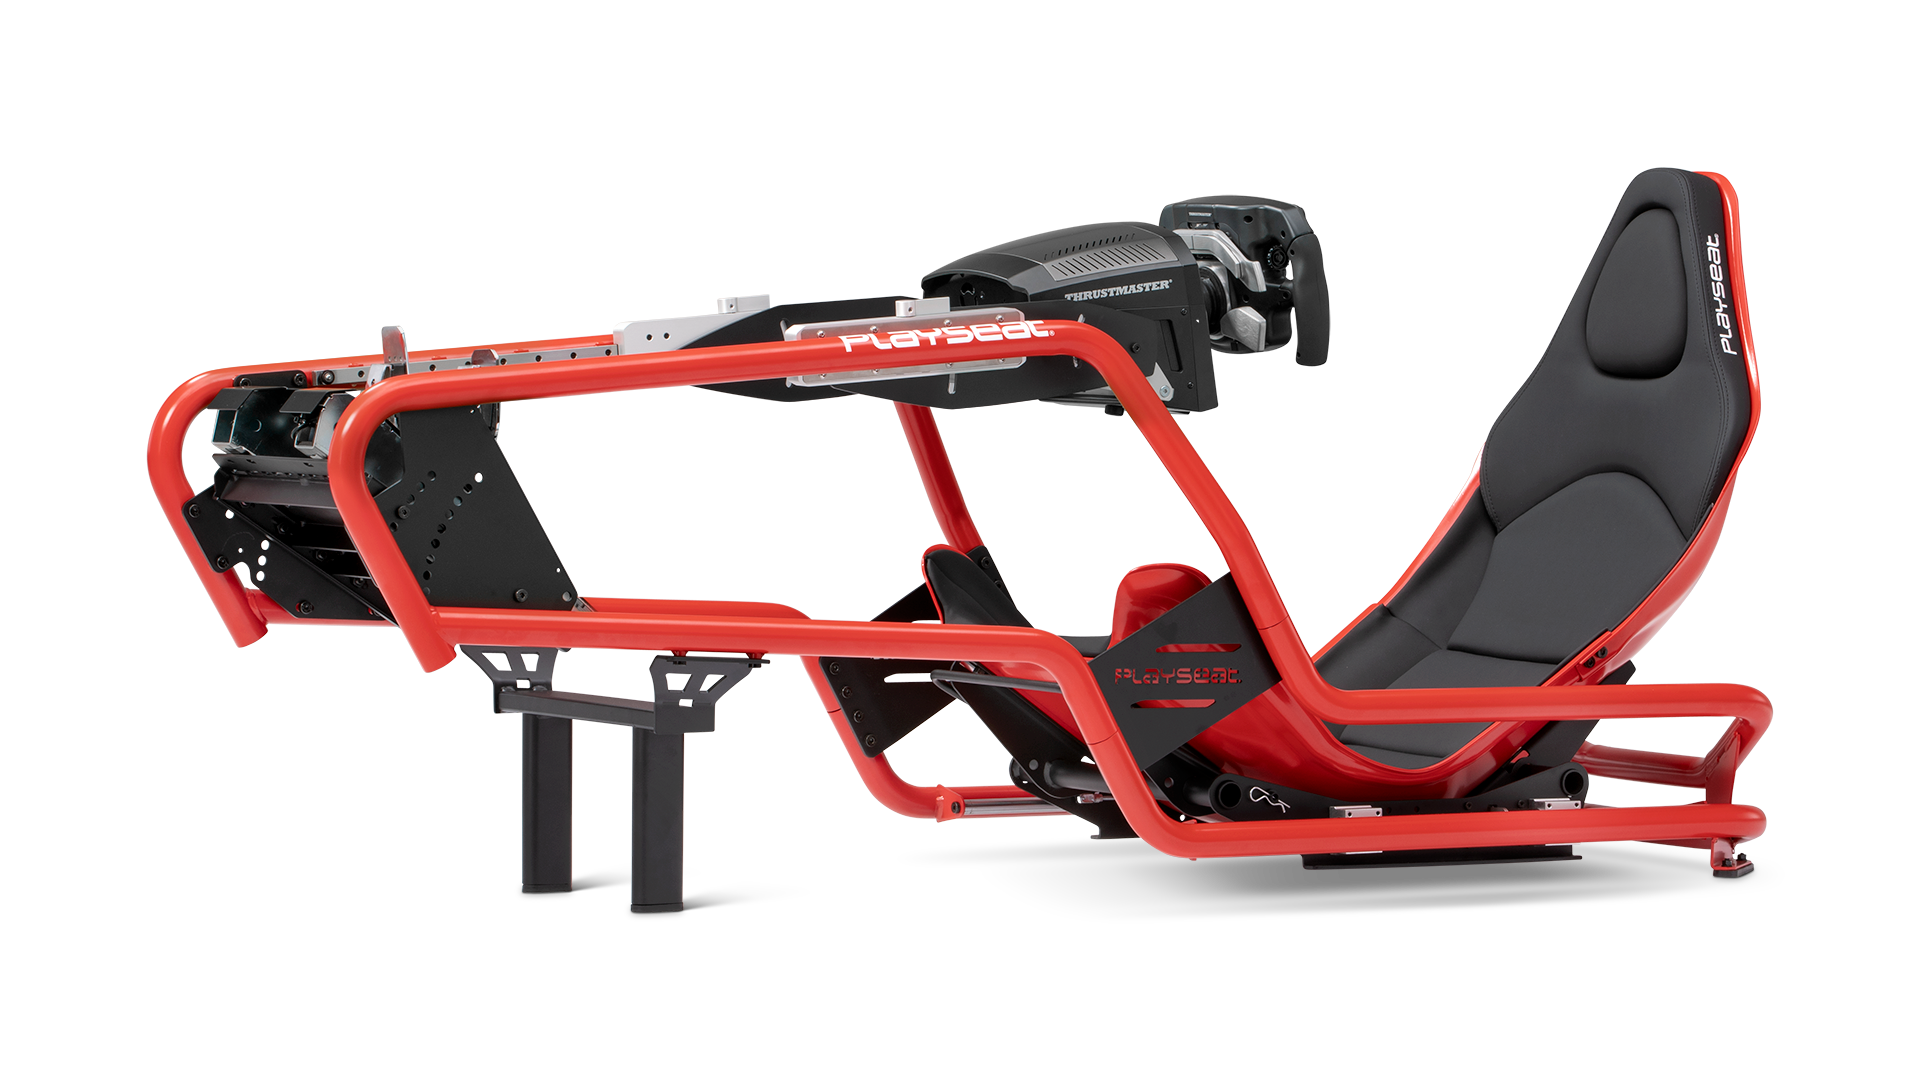 PlayseatStore - Check out @tipotopz simracing setup, including the